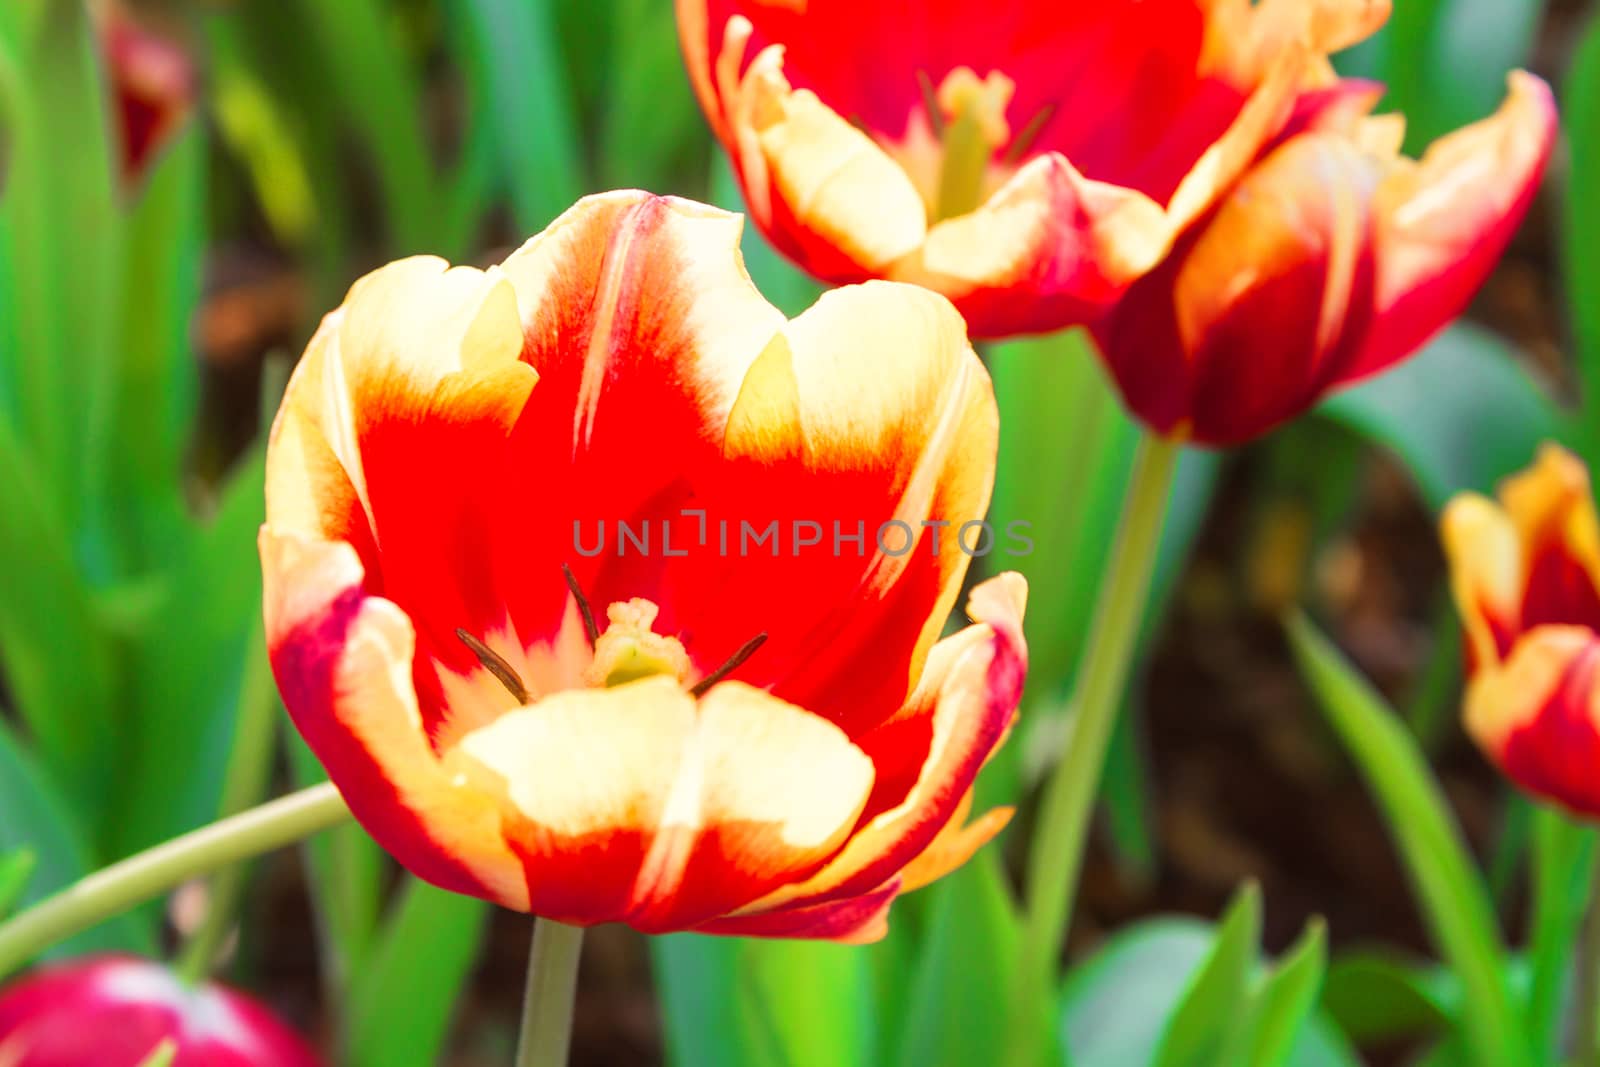 Tulip flower by nopparats